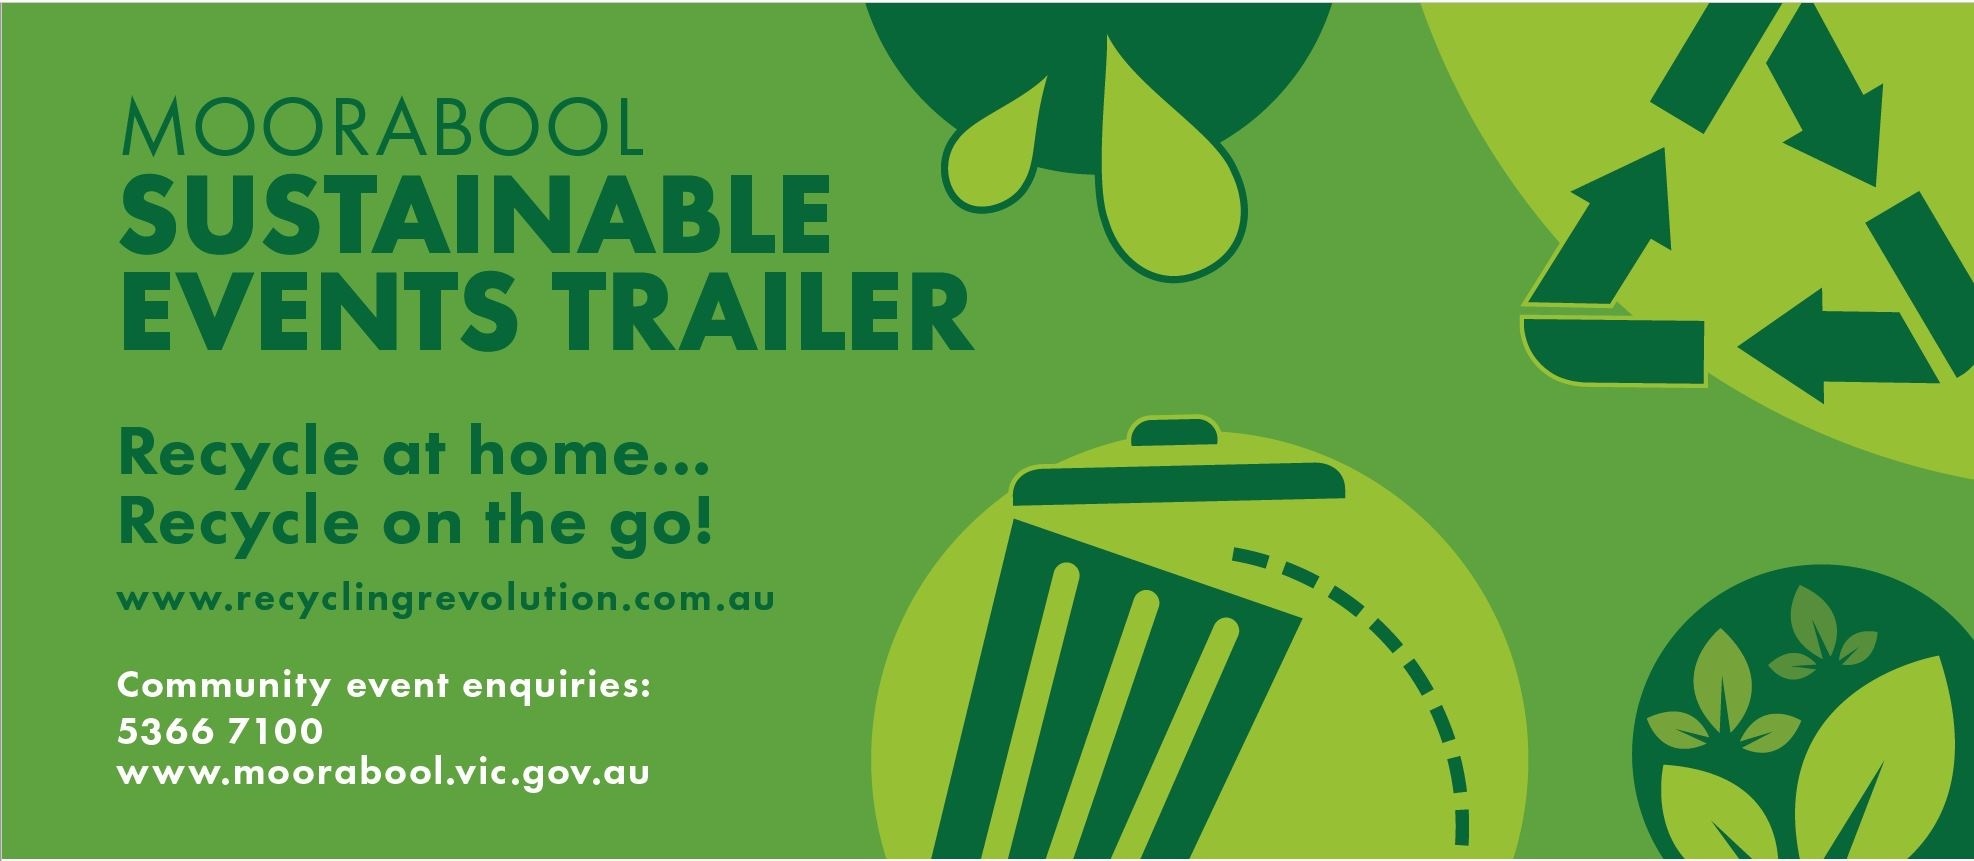 Sustainable Events trailer artwork call 5366 7100 to speak to Council